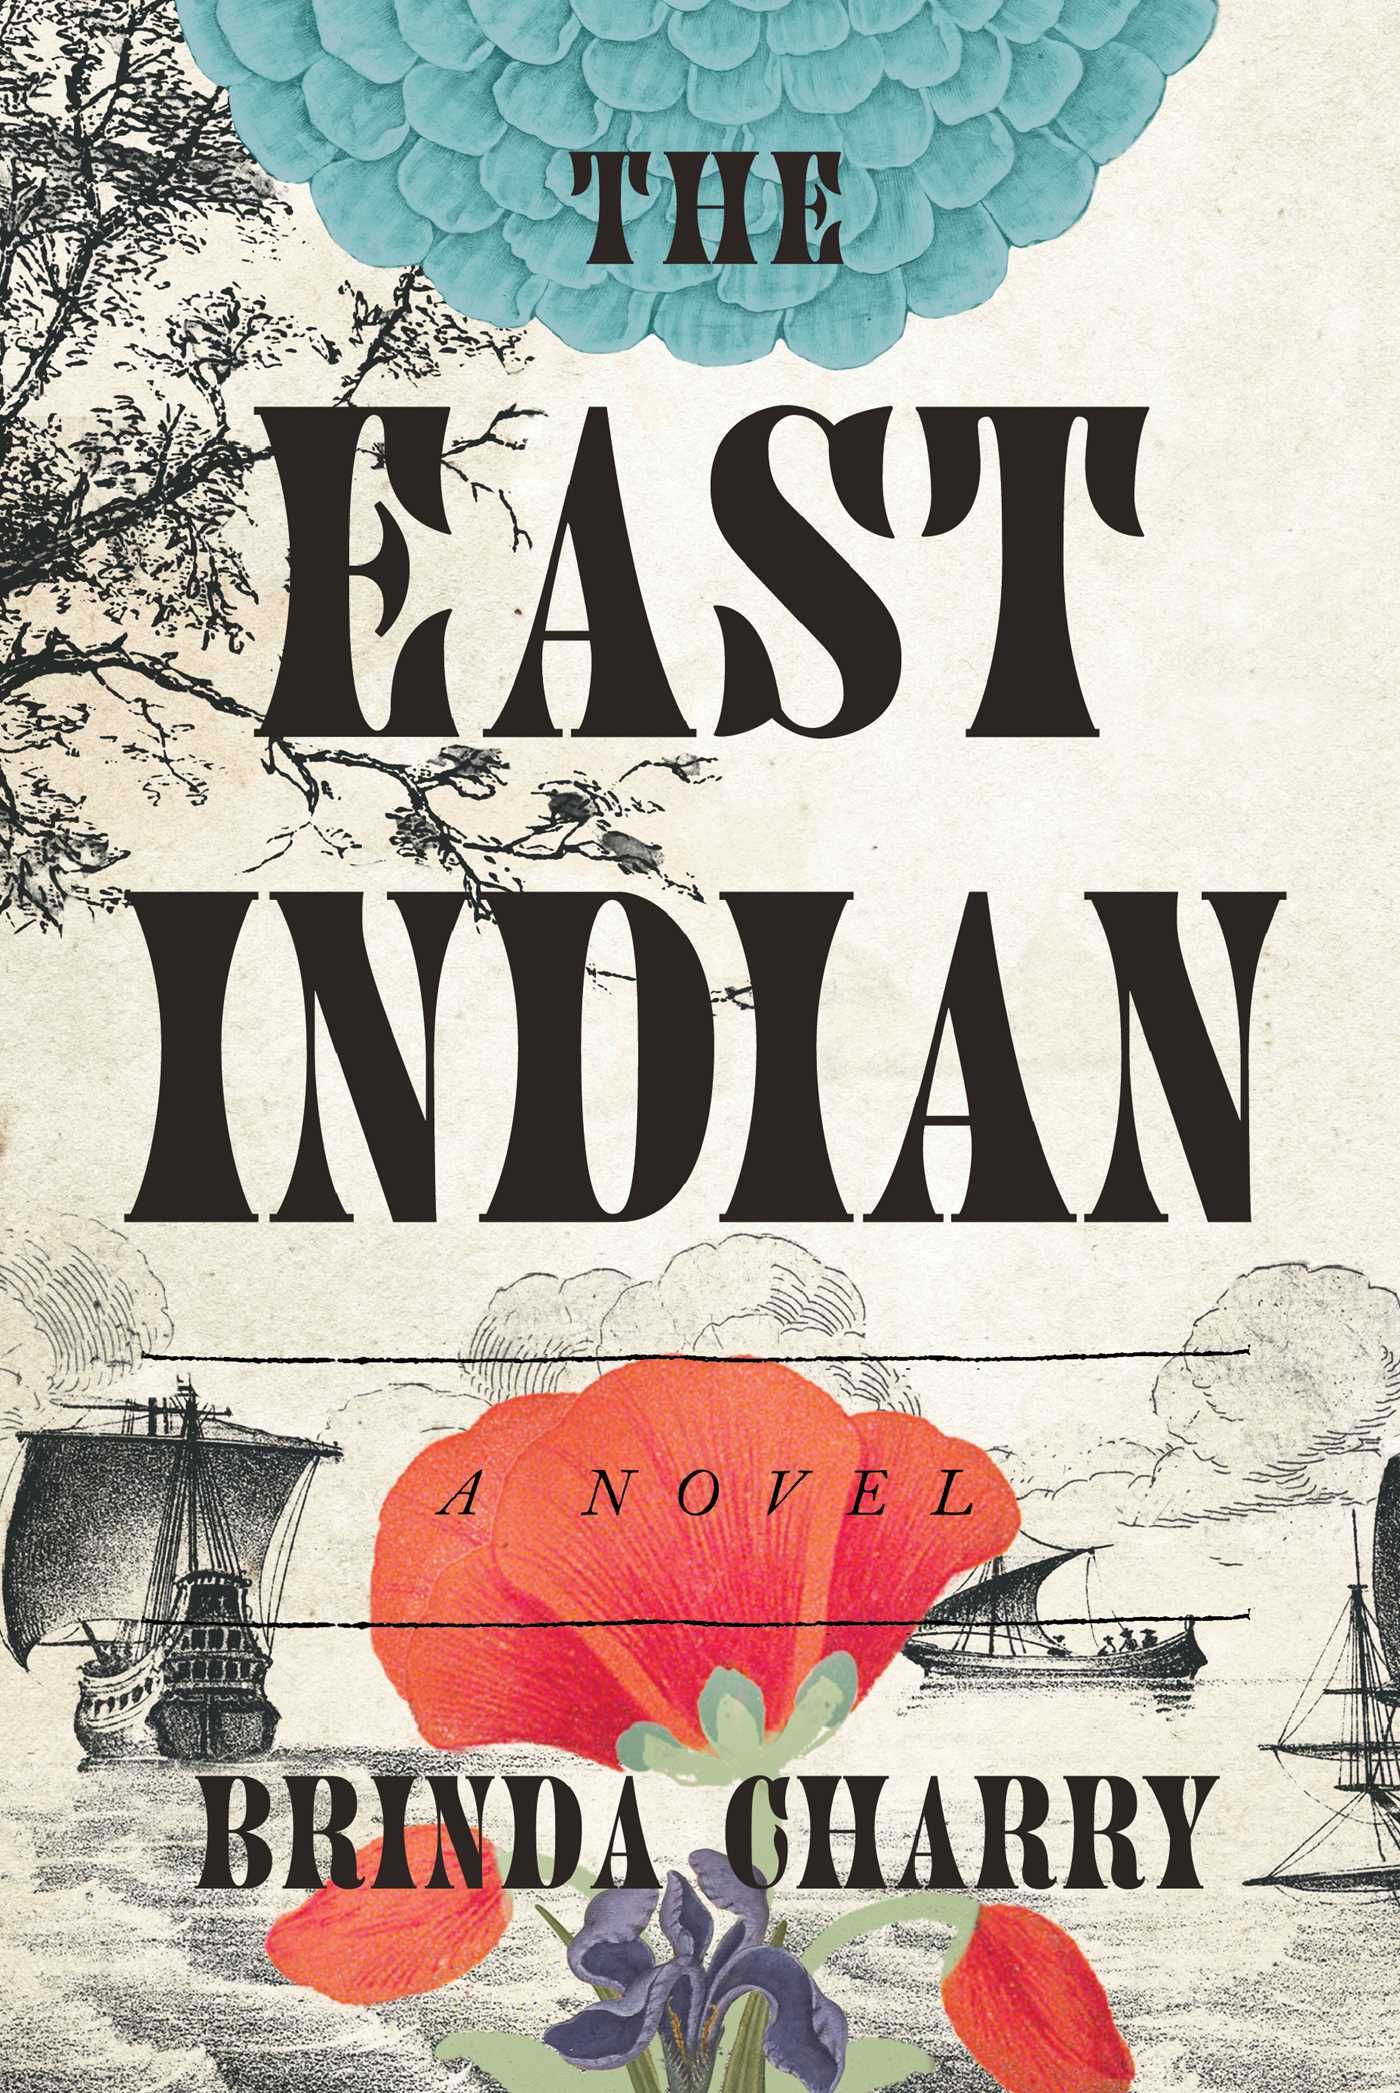 Cover of the East Indian by Brinda Charry